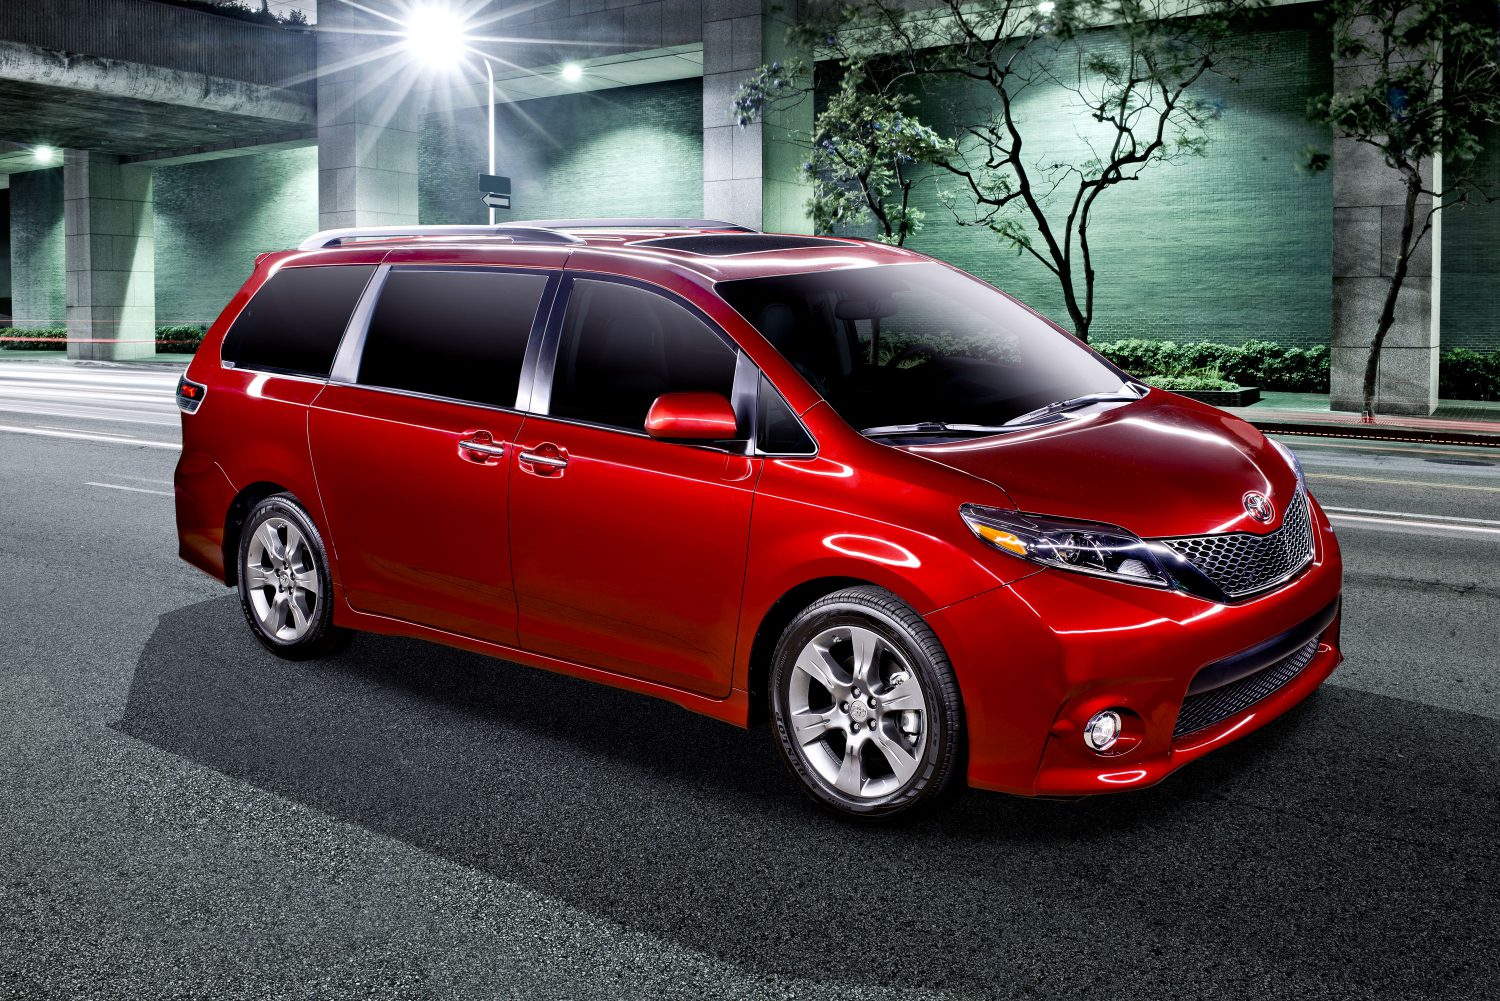 From Here to Outer Space: 2015 Toyota Sienna Inspires Unexpected Adventures  - Toyota USA Newsroom